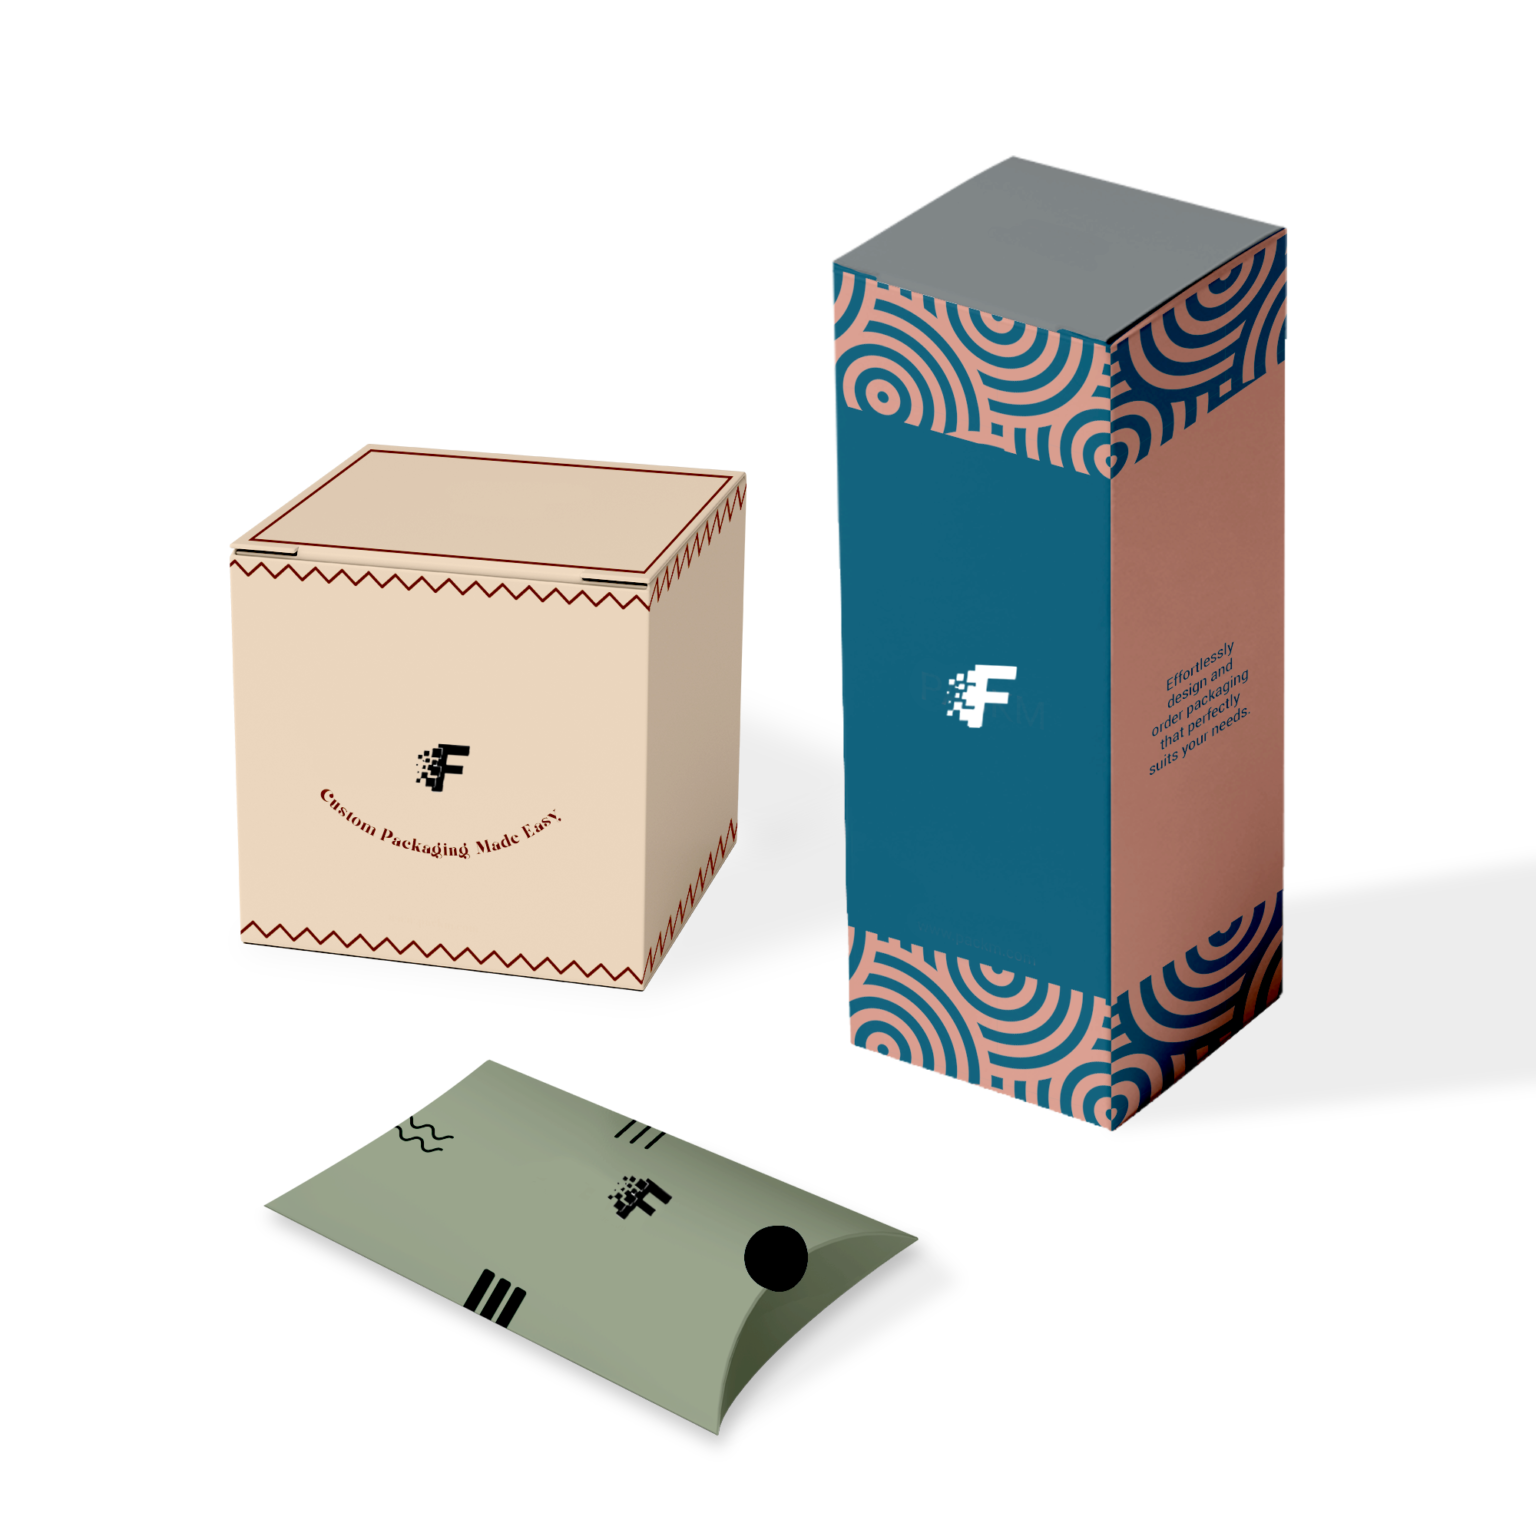 Enhance the Appeal of Your Products with Custom Fast Packaging Boxes!